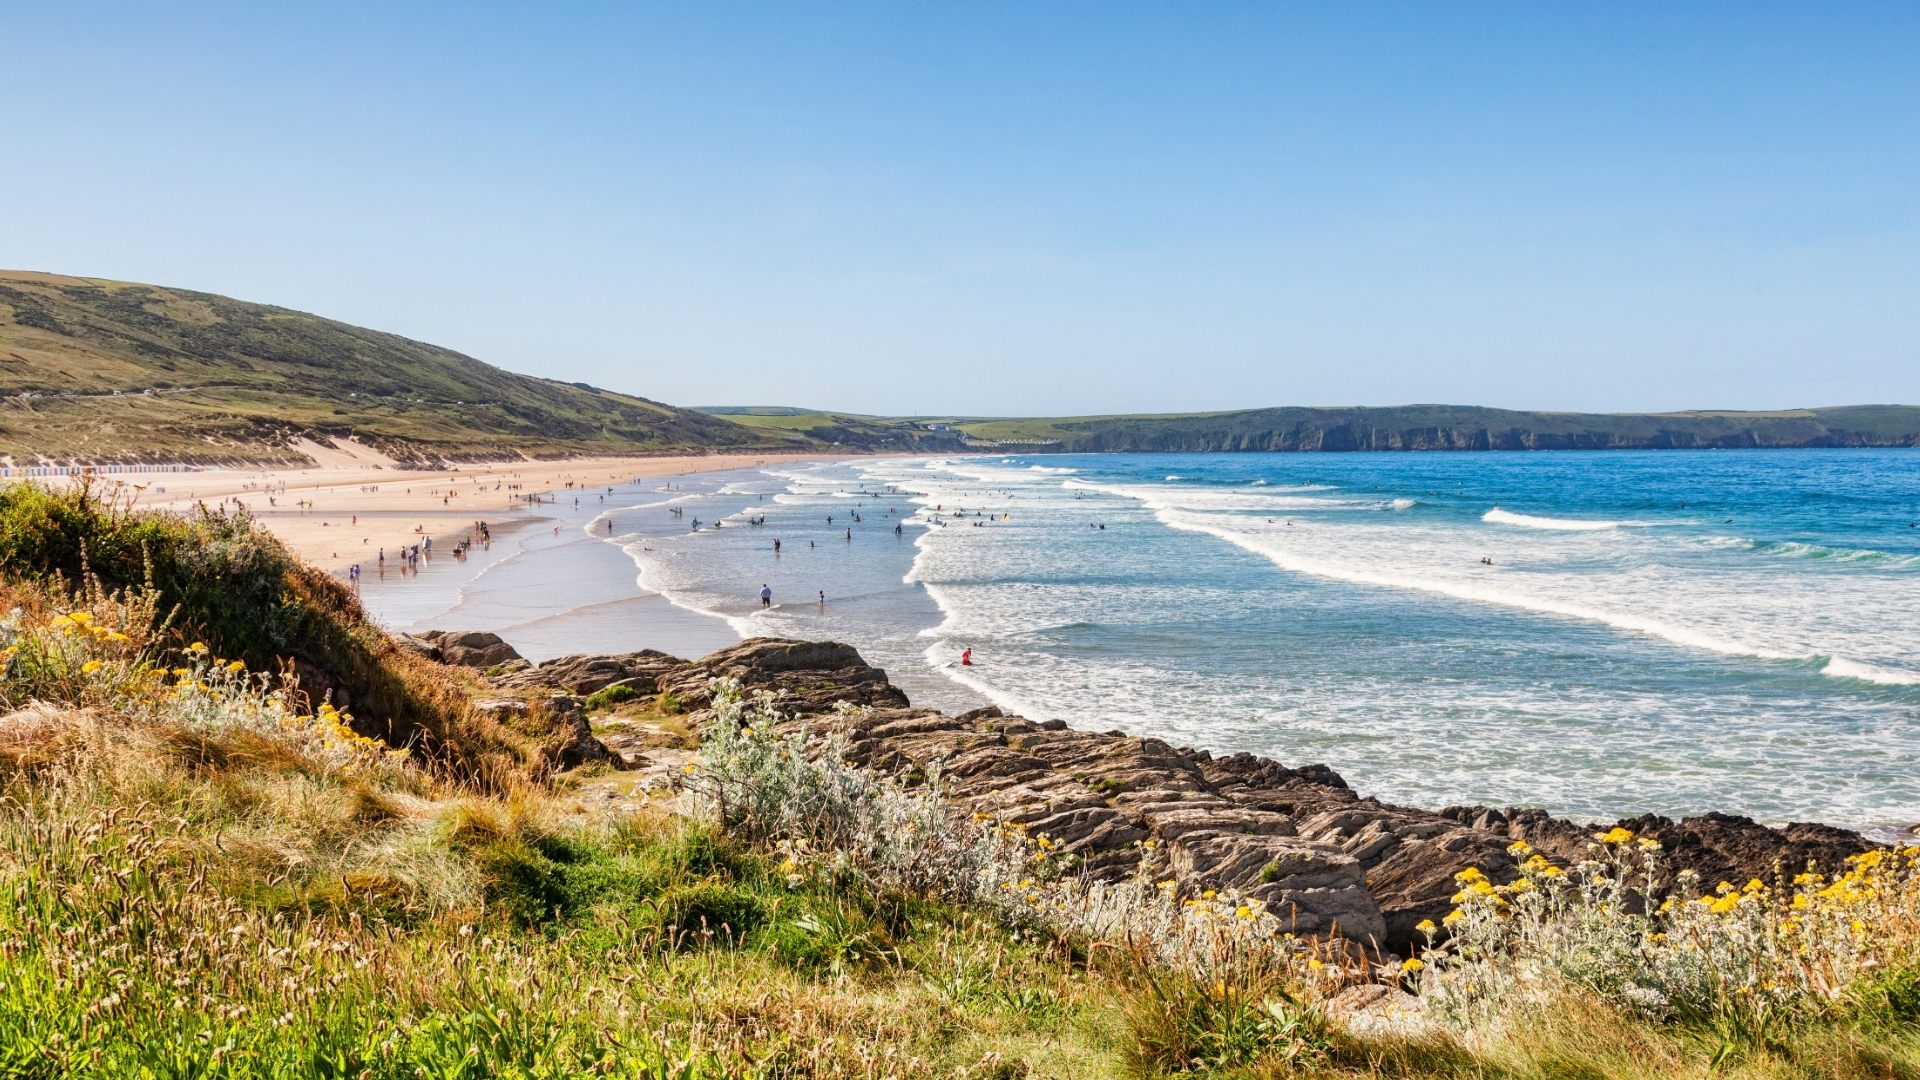 Stock image of Woolacombe Beach in North Devon with blue seas yellow sand and green hills